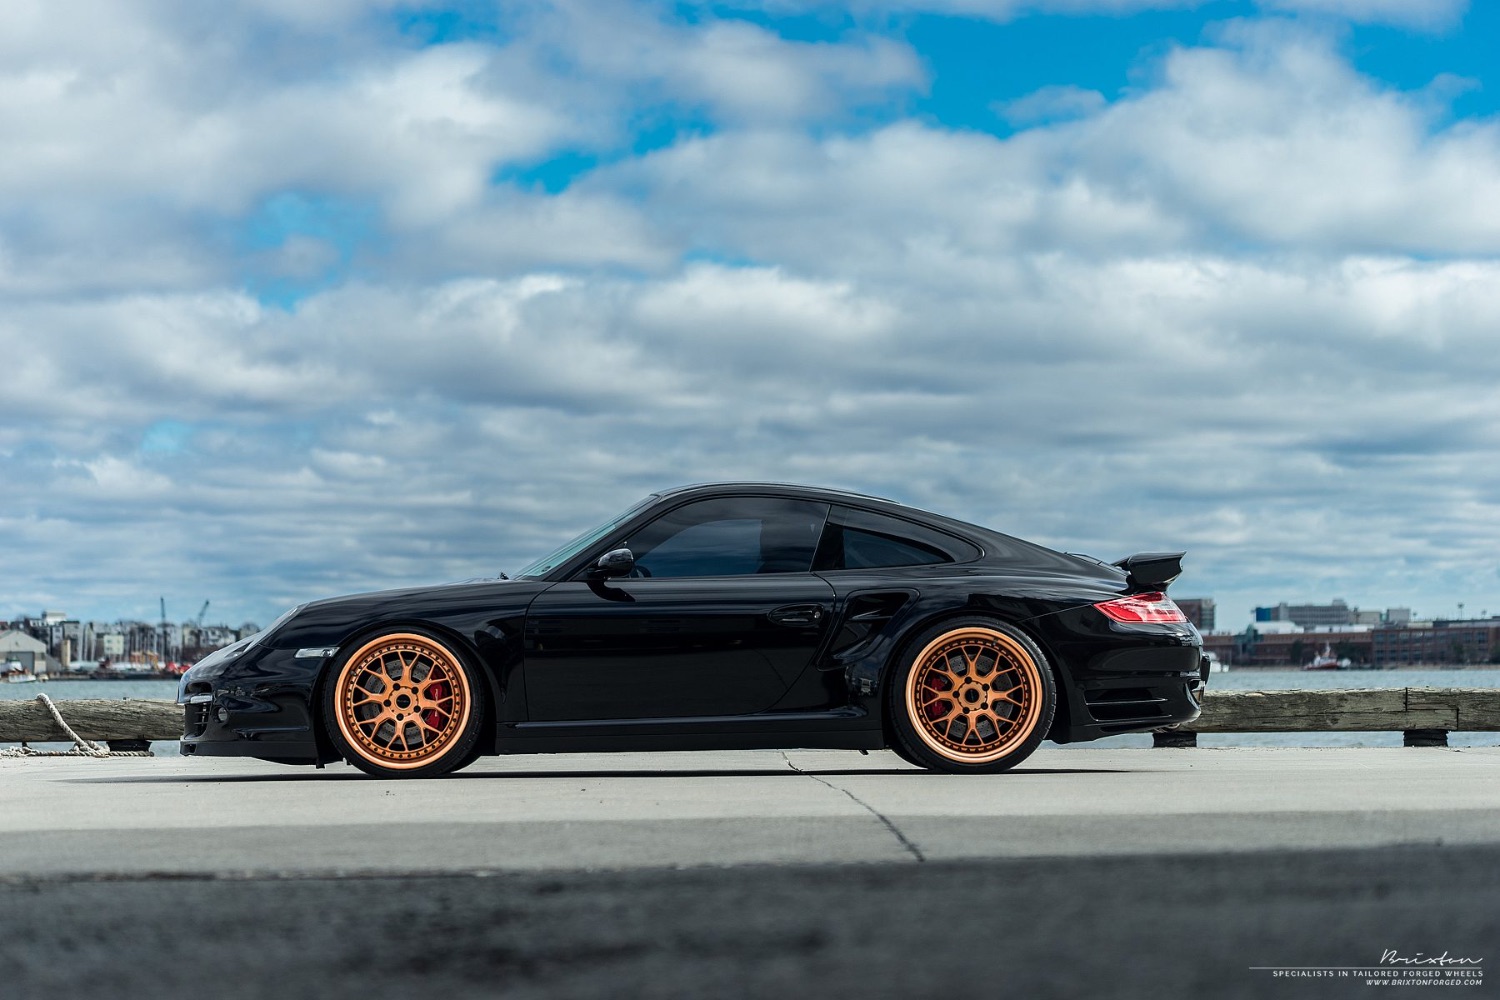 black-porsche-997-turbo-brixton-forged-cm16-circuit-series-forged-wheels-20-inch-rose-gold-concave-3-piece-5-1800x1200